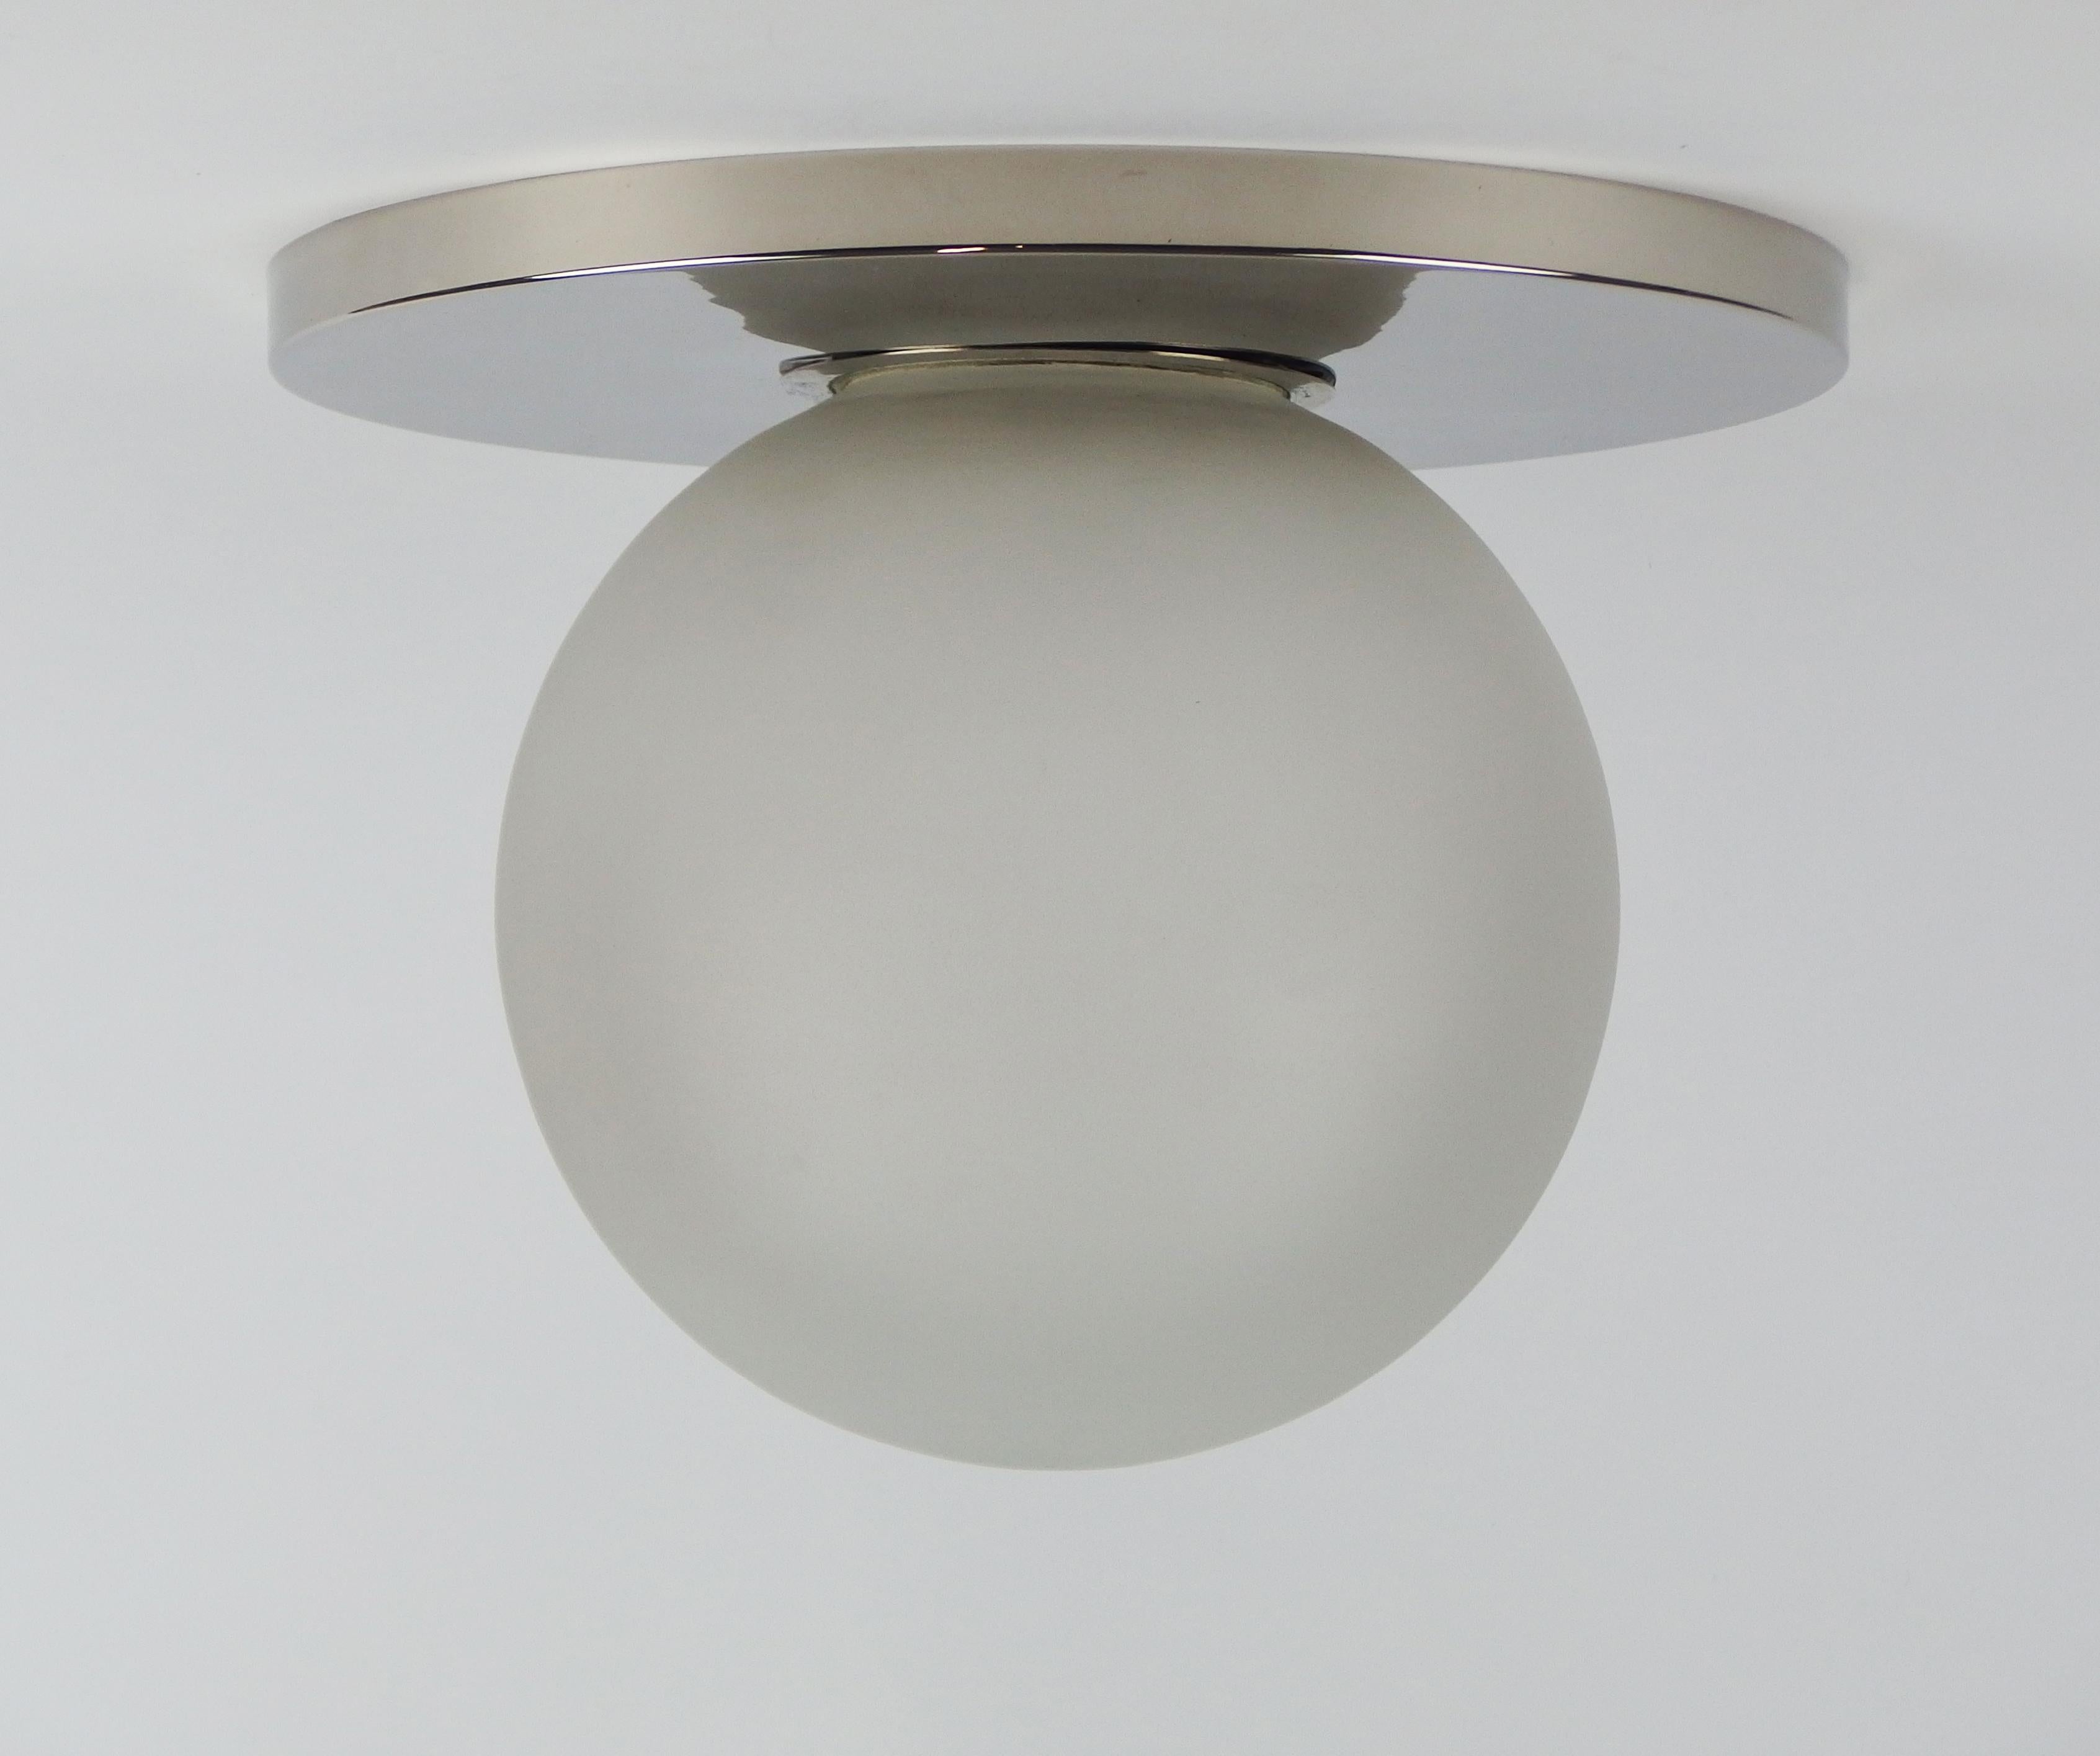 A modernist Art Deco flush mount in the style of Bauhaus with a thick frosted glass sphere mounted on a nickel-plated structure.
Measures: Sphere diameter 9.44 in.